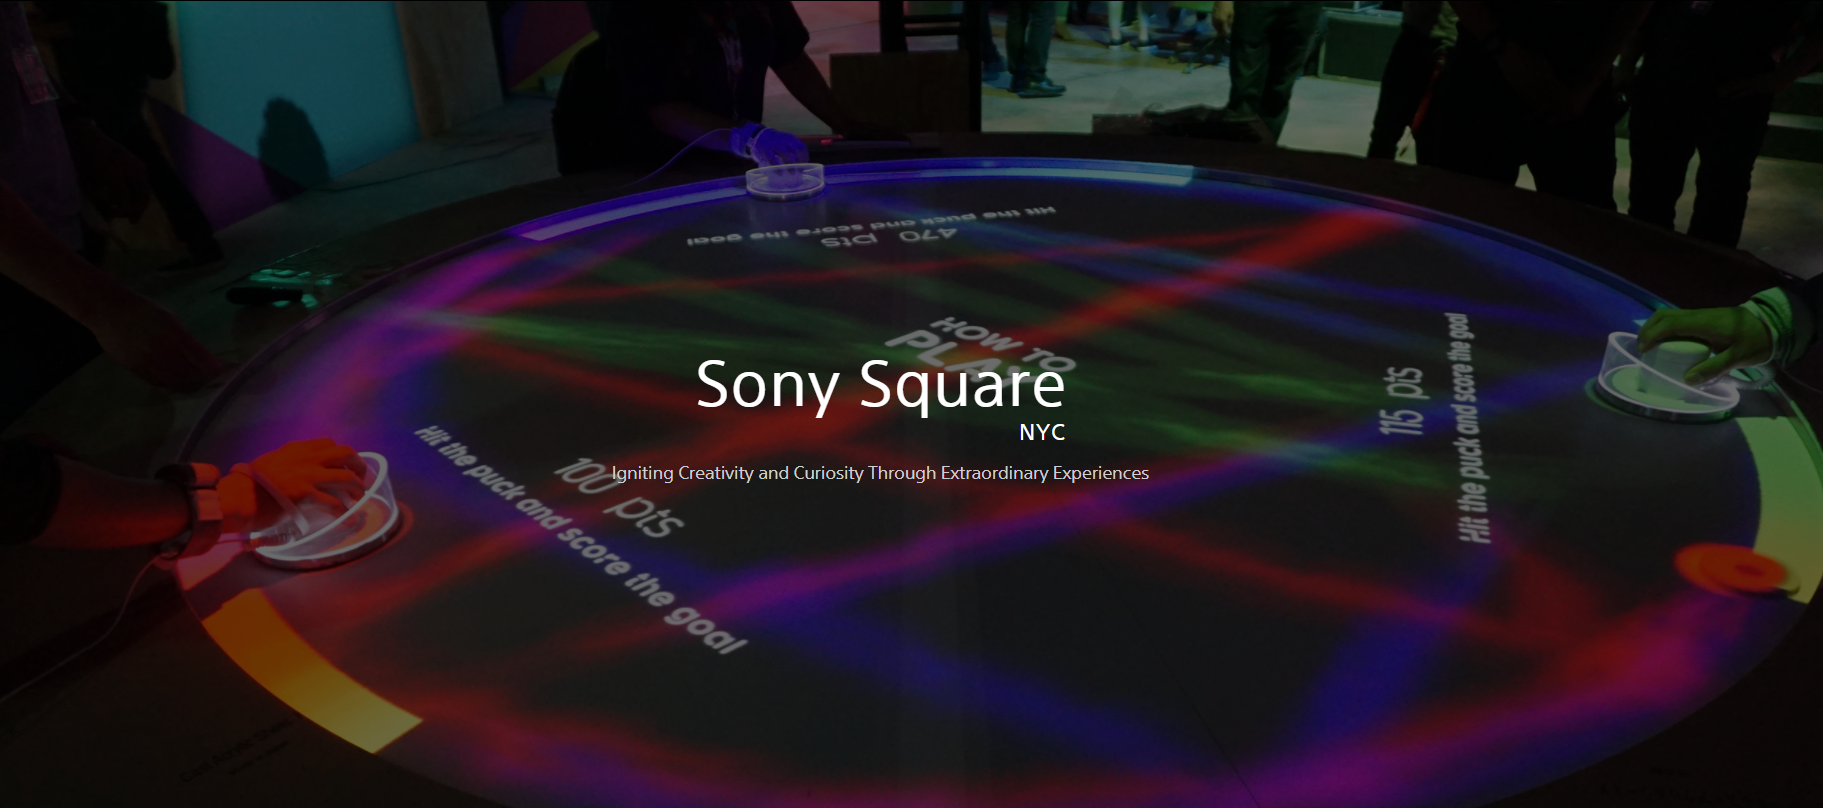 Augmented Reality Game A(i)R Hockey Available for Testing at Sony Square NYC